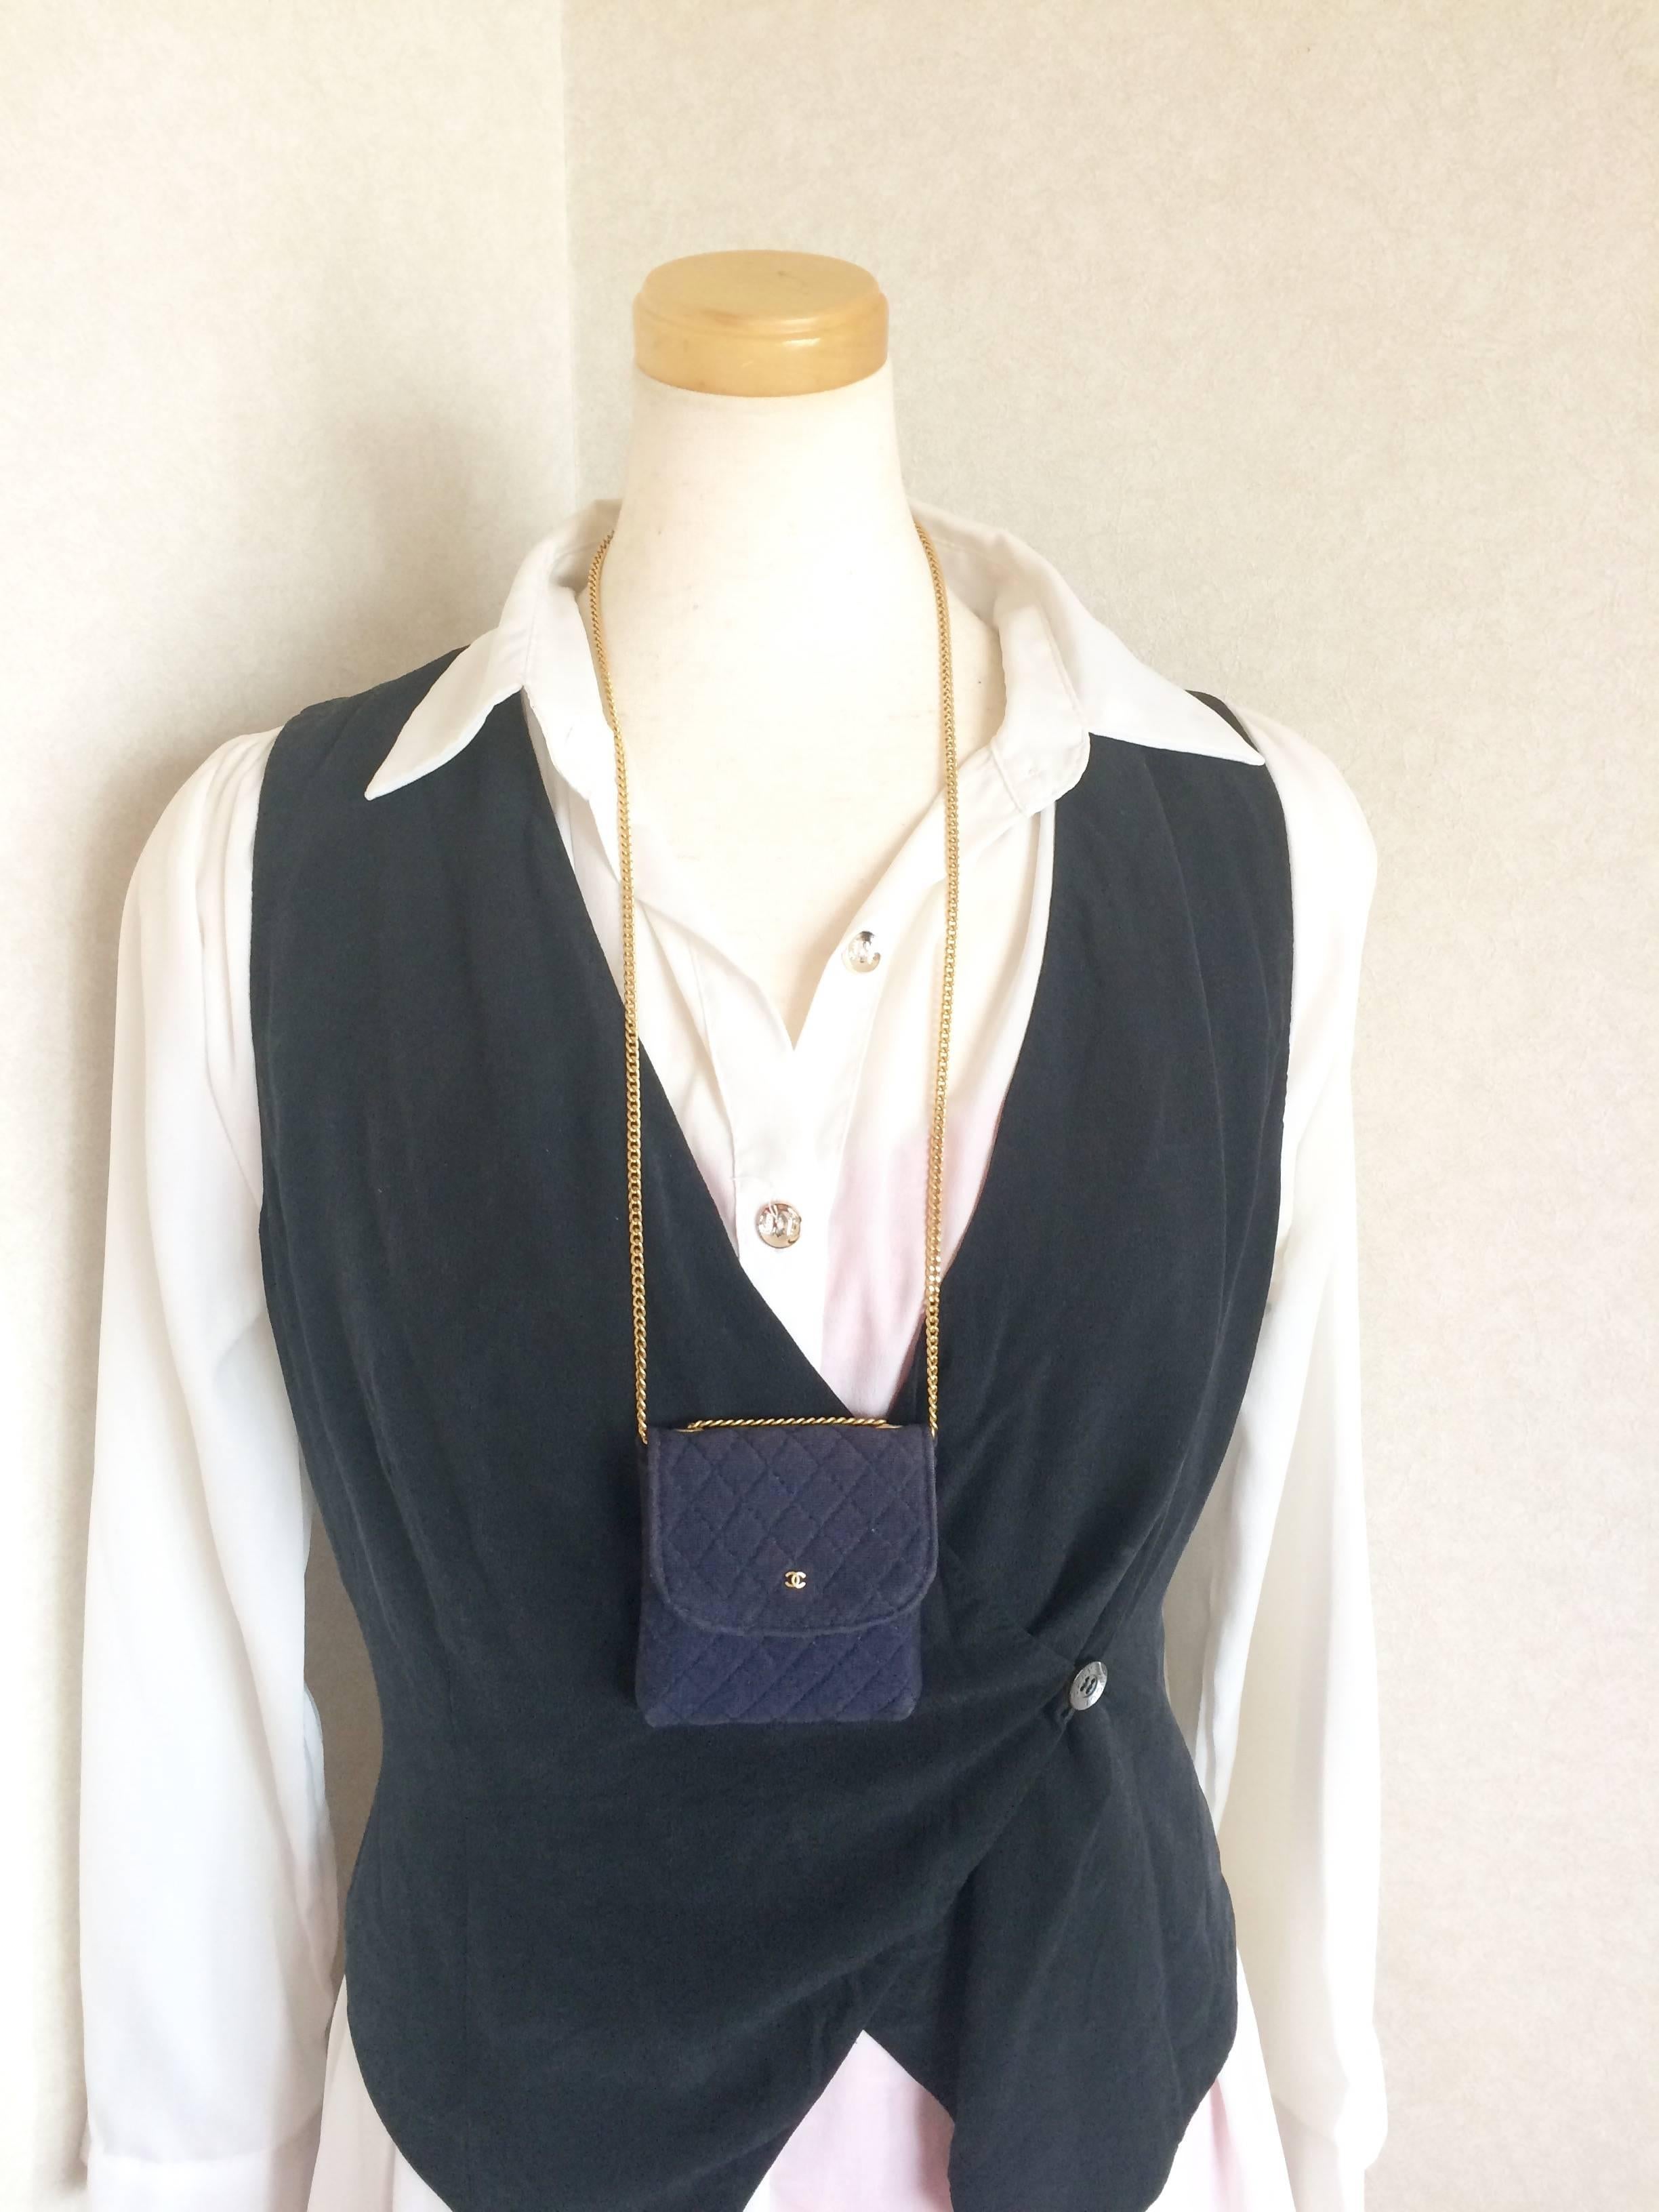 1990s. Vintage Chanel navy quilted jersey fabric mini pouch, coin purse, long necklace with golden chain and CC motif. Great gift Chanel jewelry

Introducing one of the most popular item from Chanel back in the era, necklace type mini pouch that